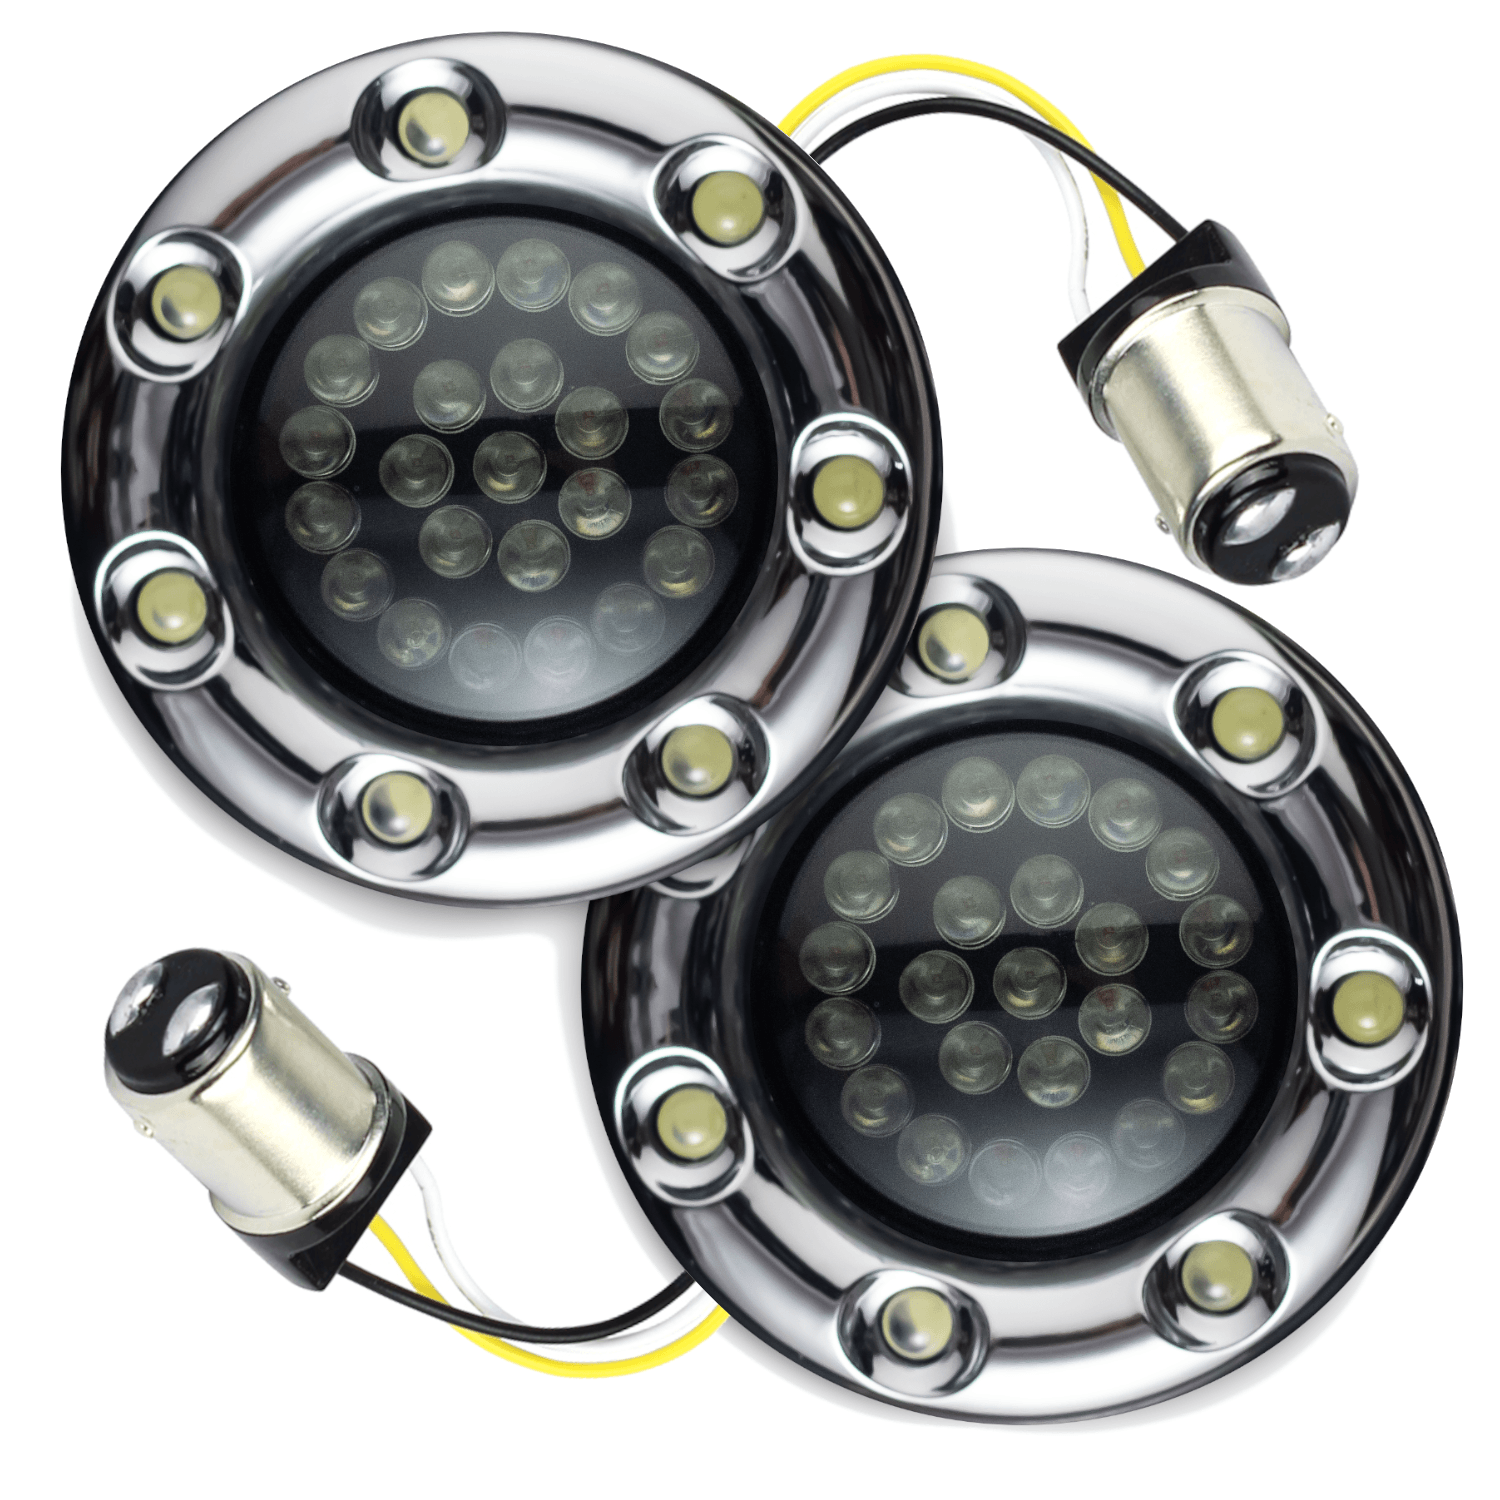 Eagle Lights 2” Infinity Beam Front LED Turn Signals with Integrated Trim Rings and White Halo Running Lights for Harley Davidson Motorcycles